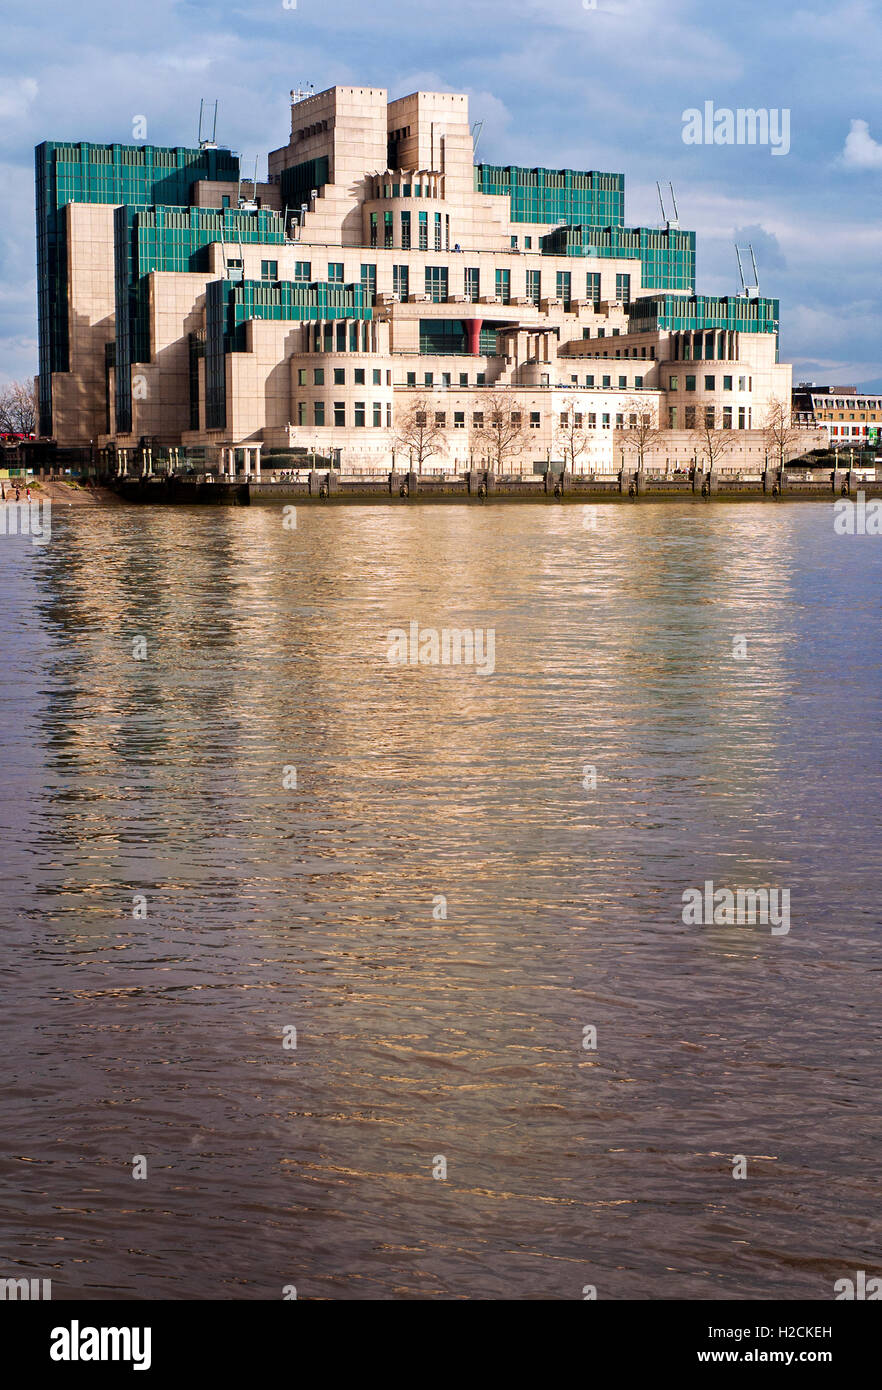 The SIS  MI6 MI5 building, reflection in river Thames London Stock Photo